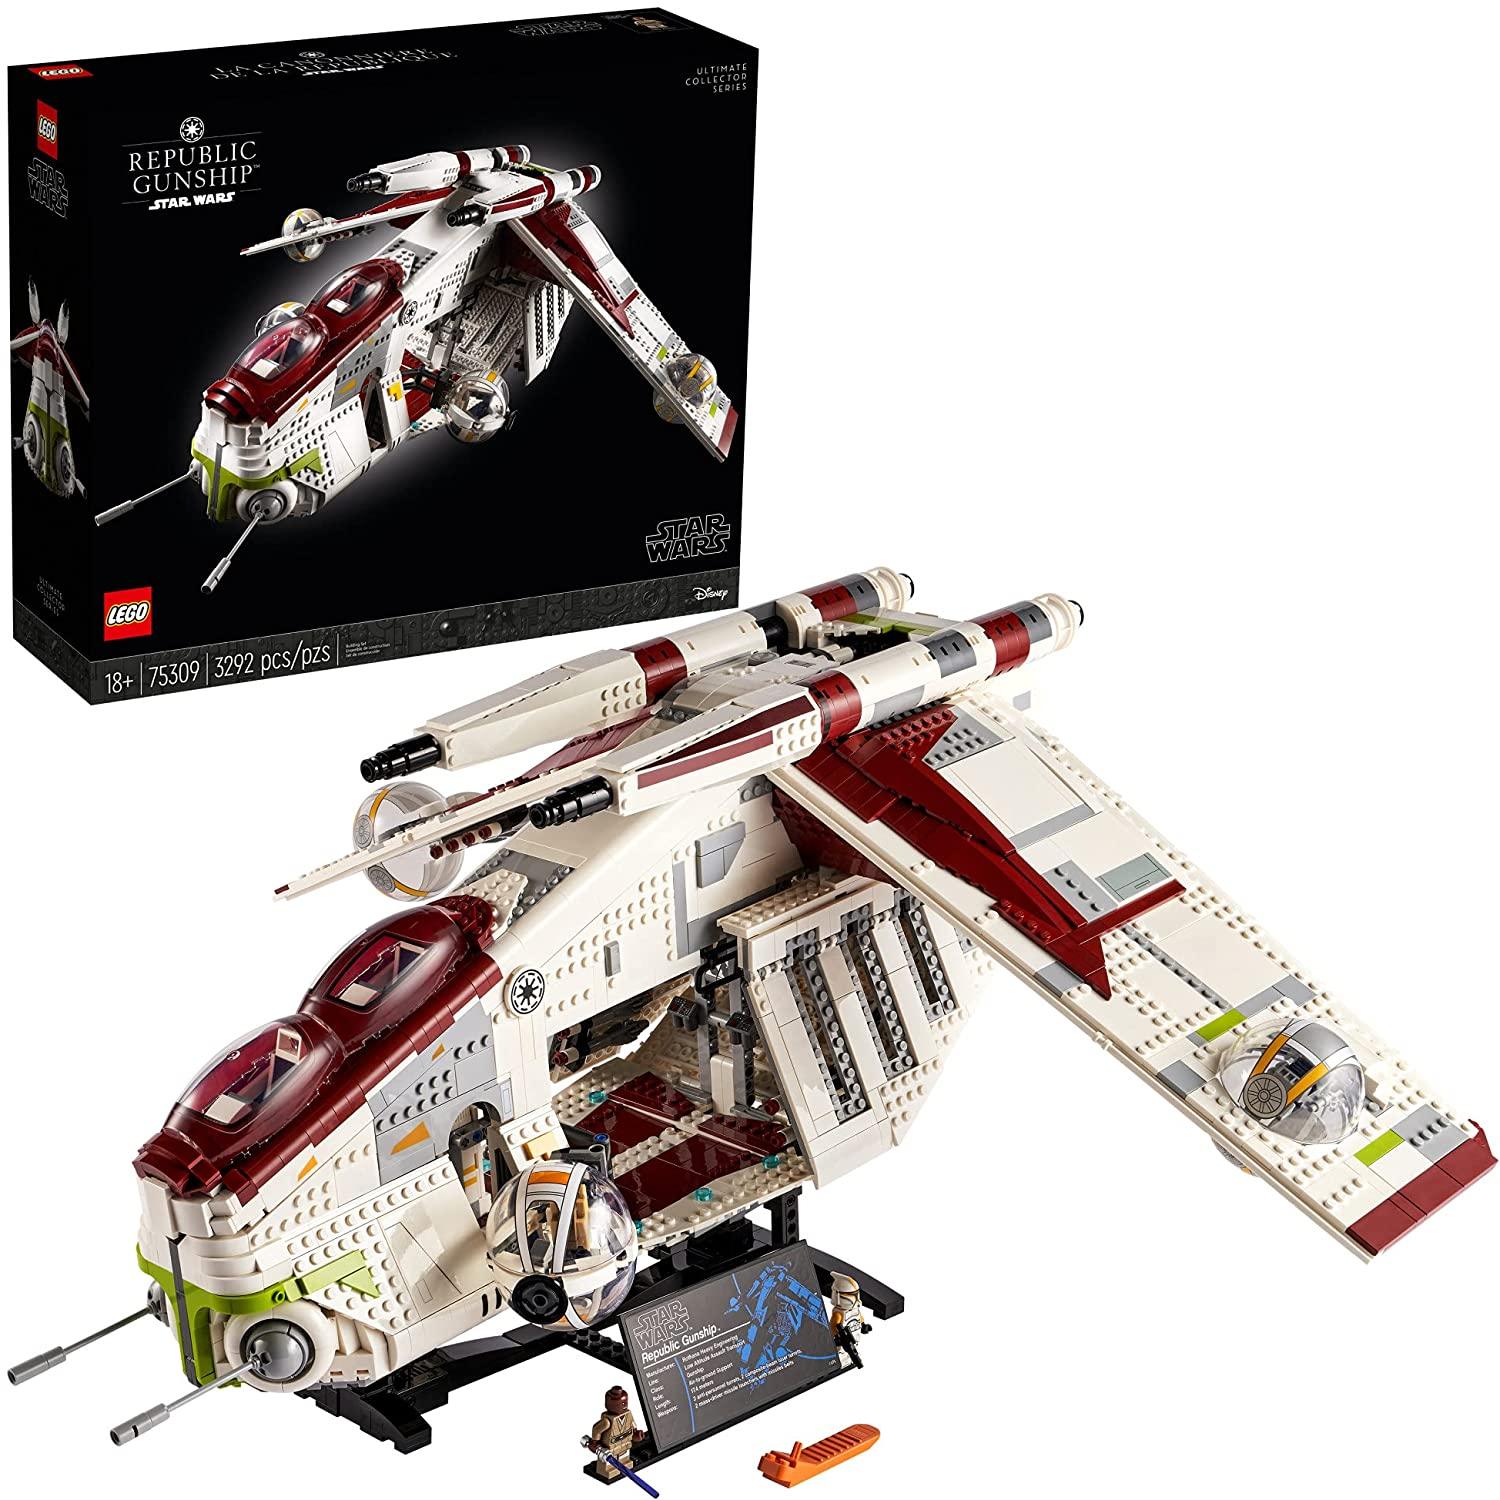 LEGO Star Wars Republic Gunship 75309 Building Kit; Cool, Ultimate Collector Series Build-and-Display Model (3,292 Pieces) - BumbleToys - 18+, Boys, LEGO, OXE, star wars